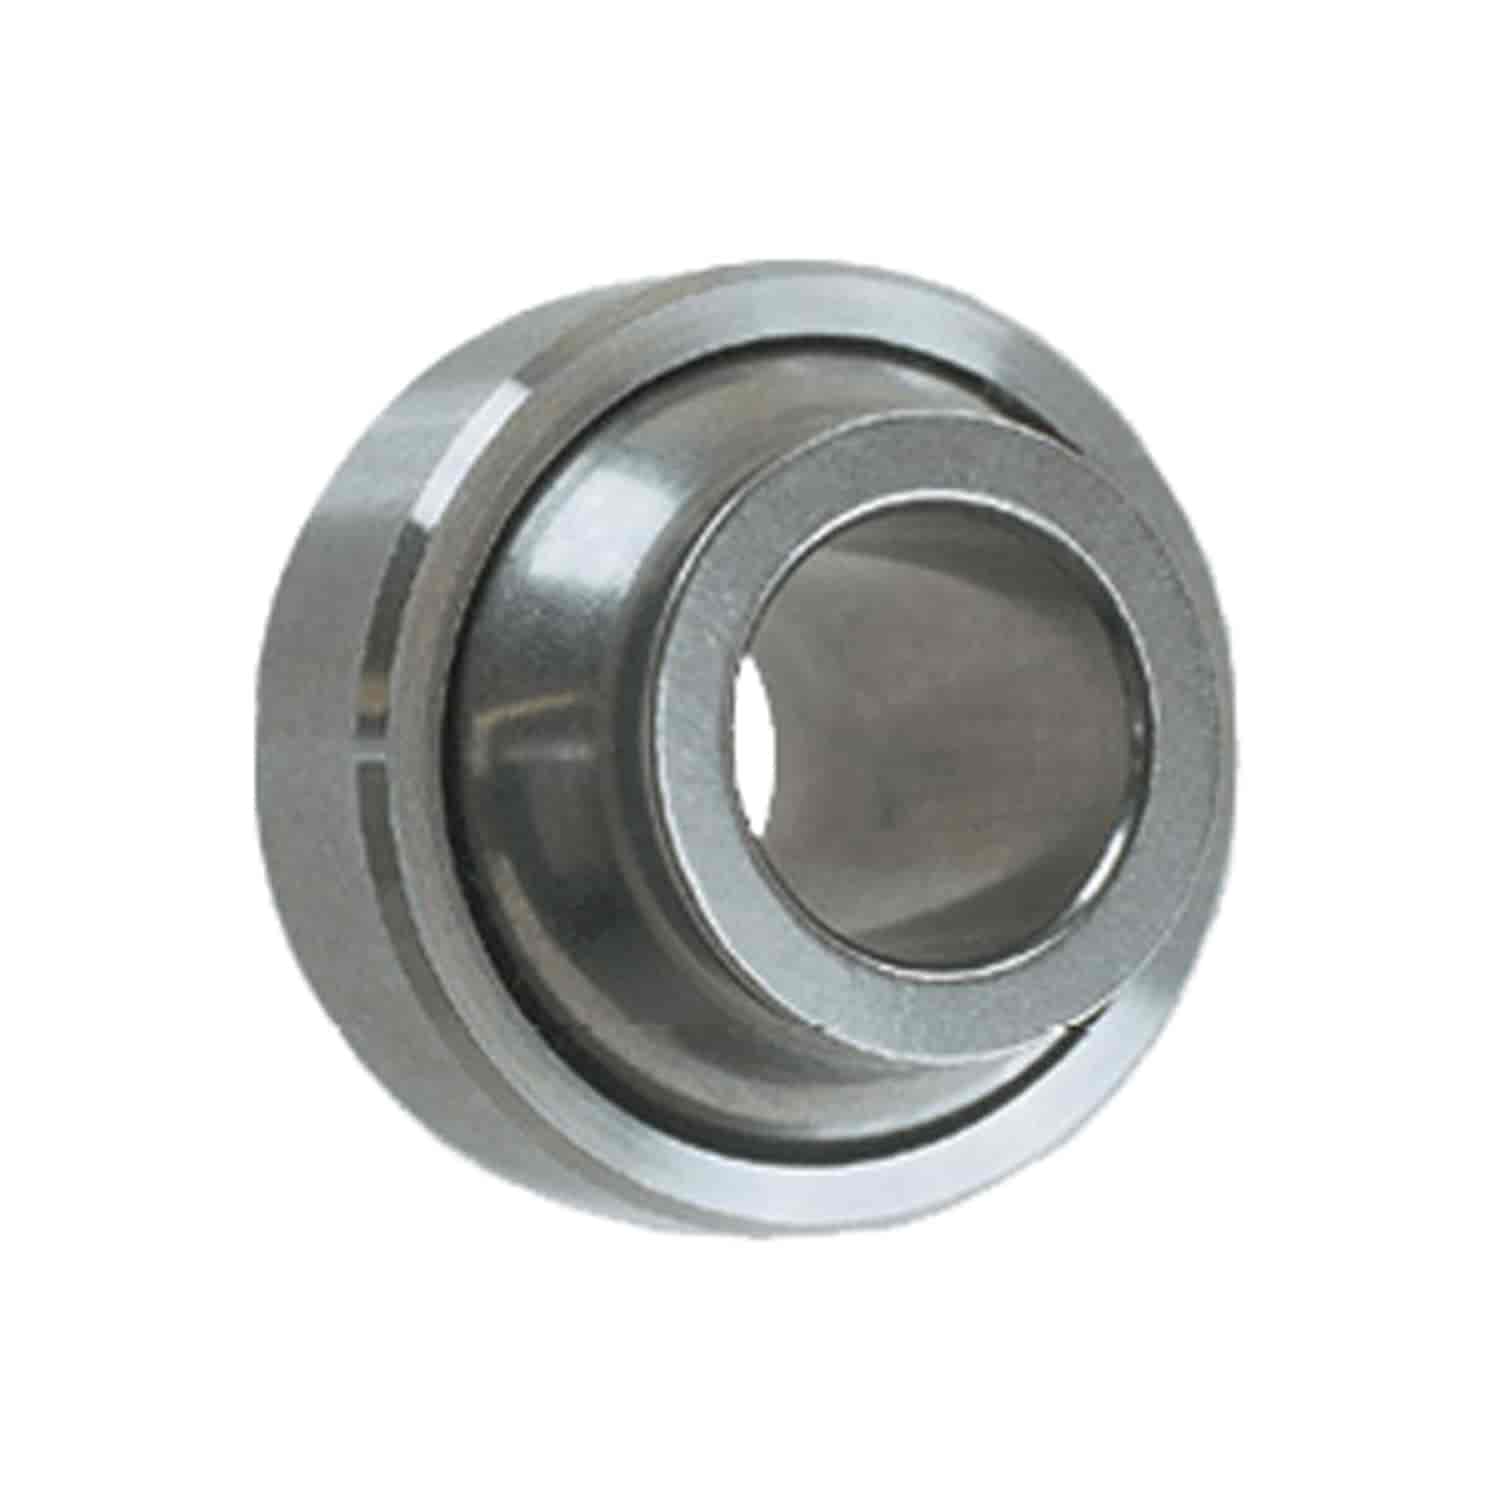 High Misalignment 440C SS Shperical Bearing Hole Size: 0.625"